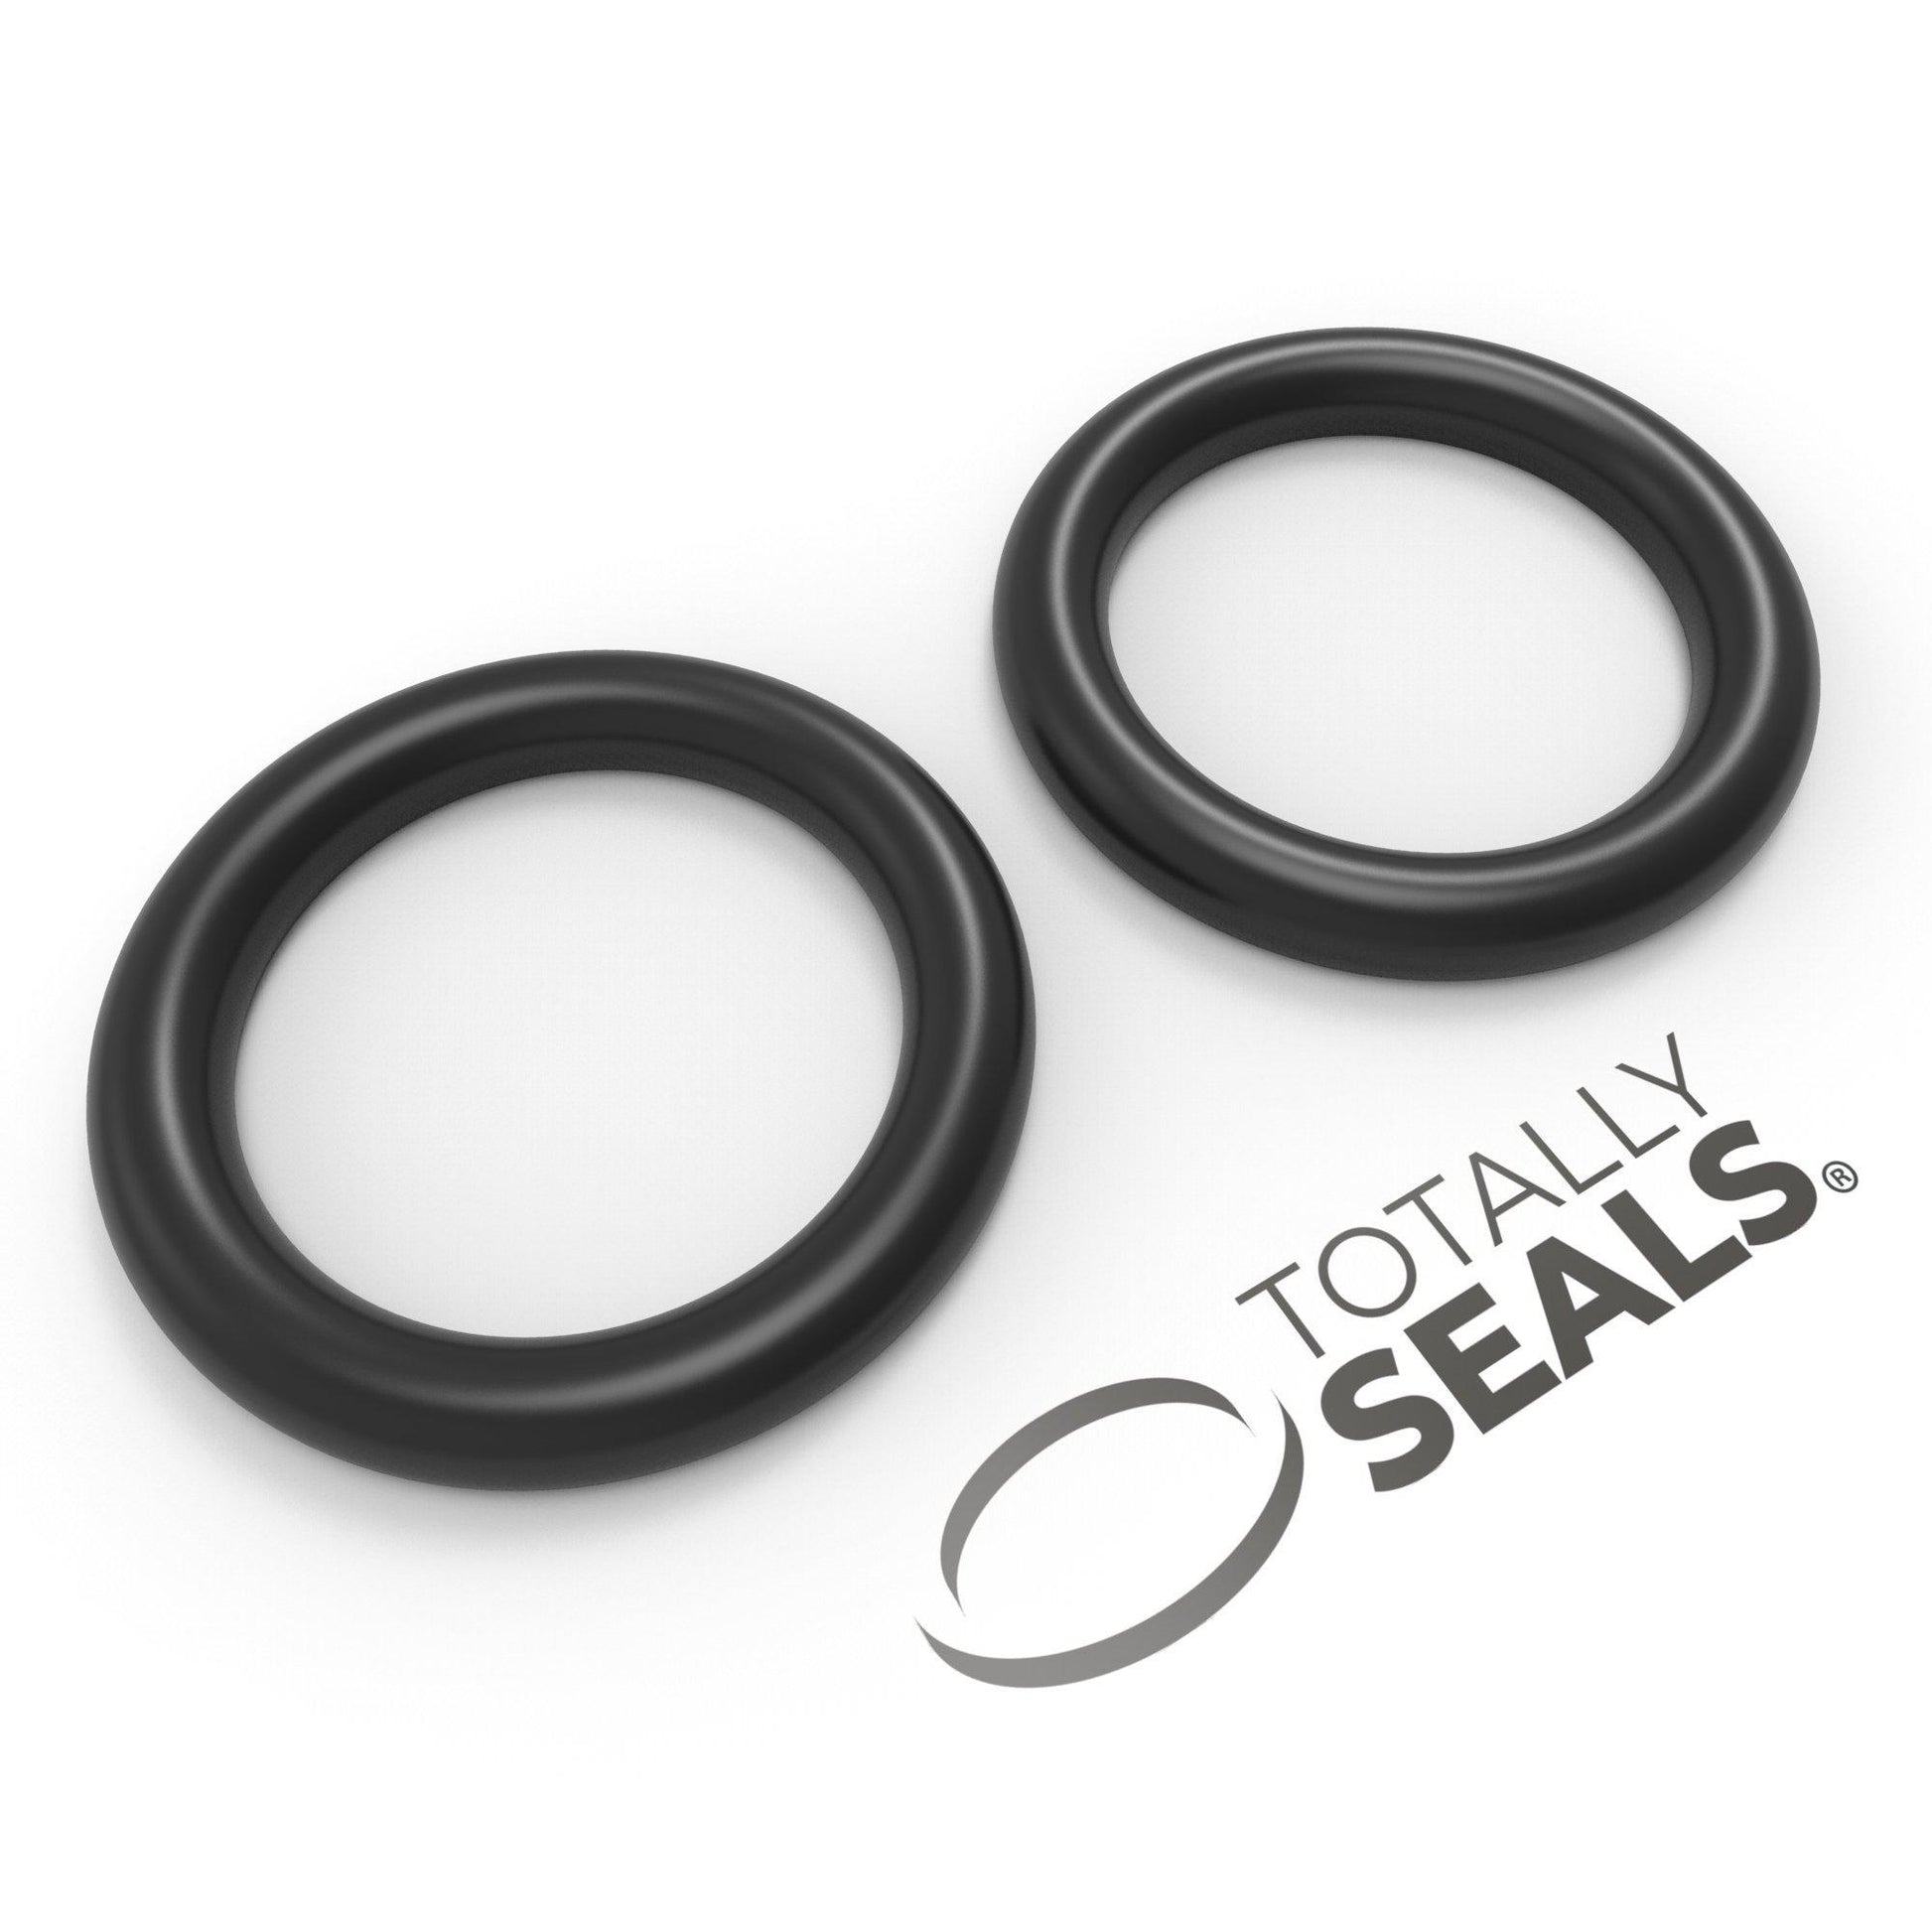 26mm x 1mm (28mm OD) Nitrile O-Rings - Totally Seals®